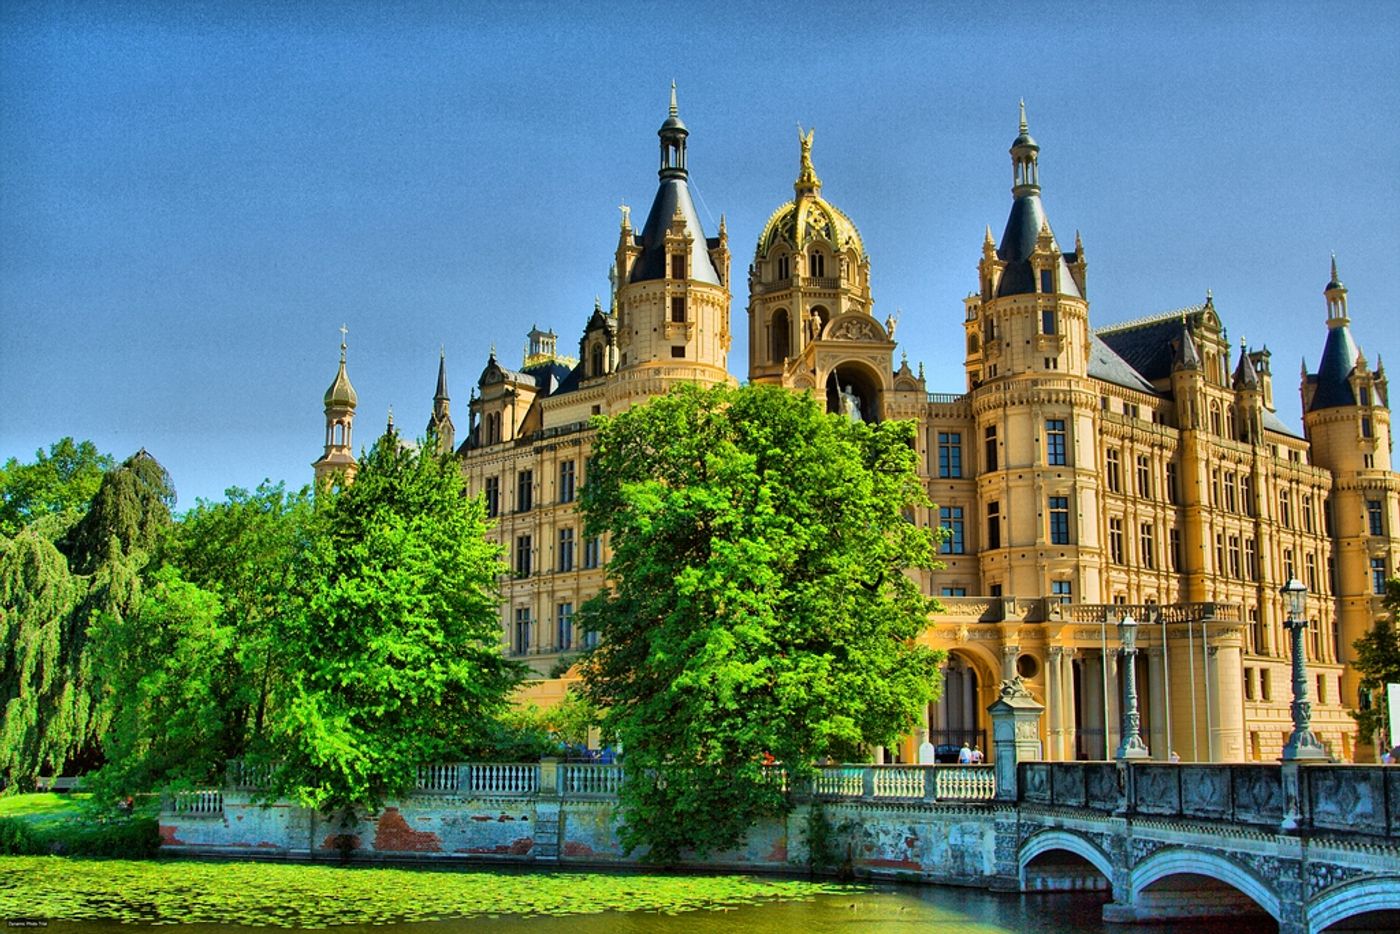 Schwerin: Cultural Jewel of the North